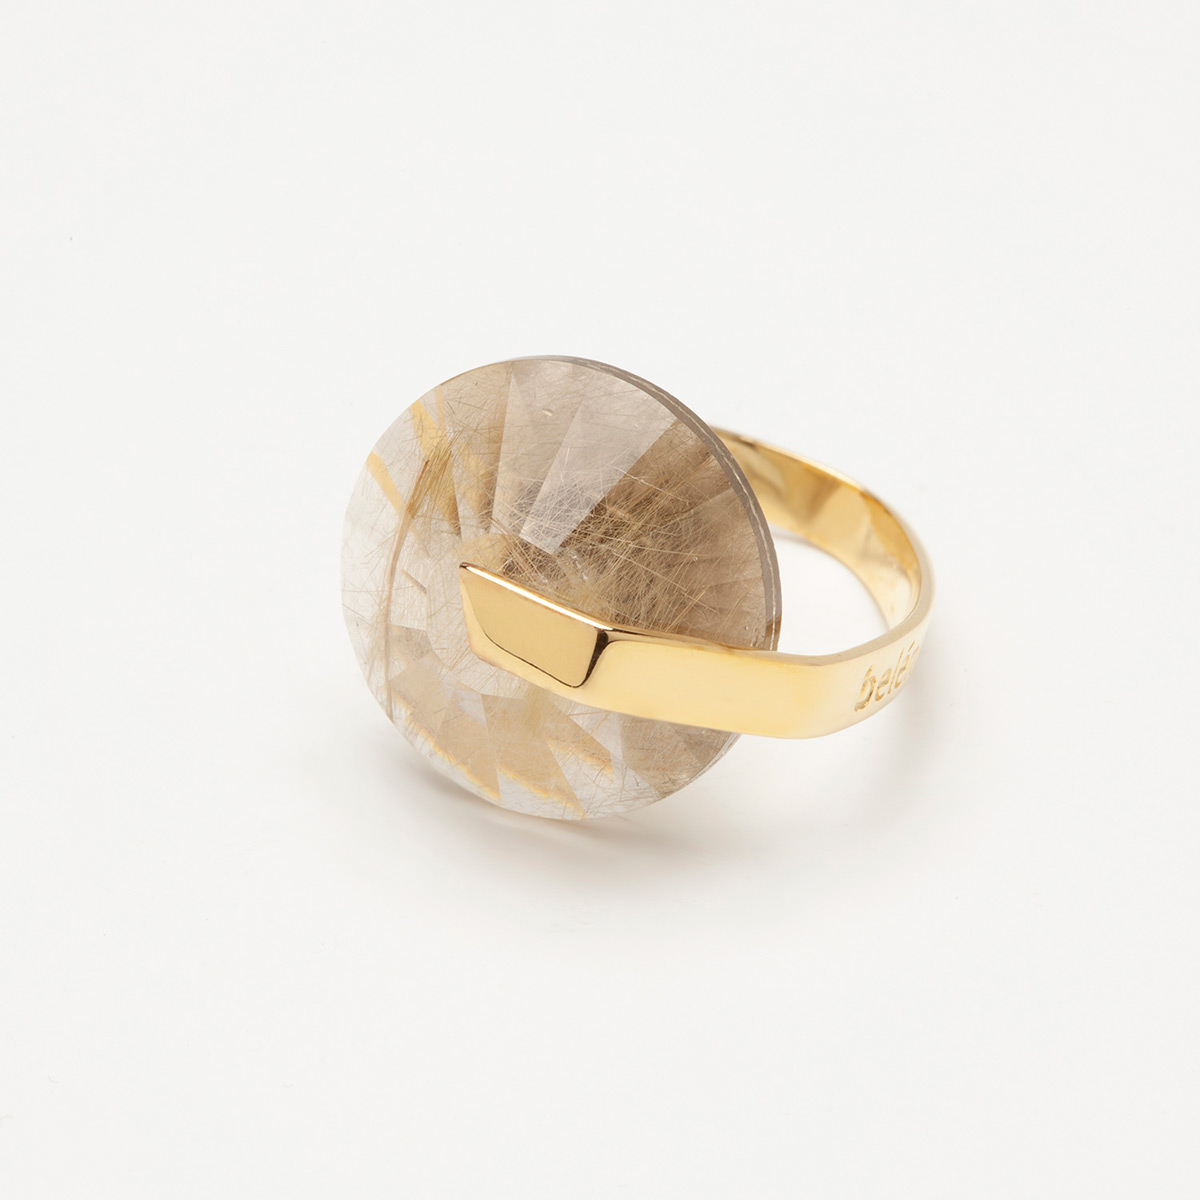 Handmade Gau ring in 18k gold plated 925 silver and rutilated quartz 1 designed by Belen Bajo